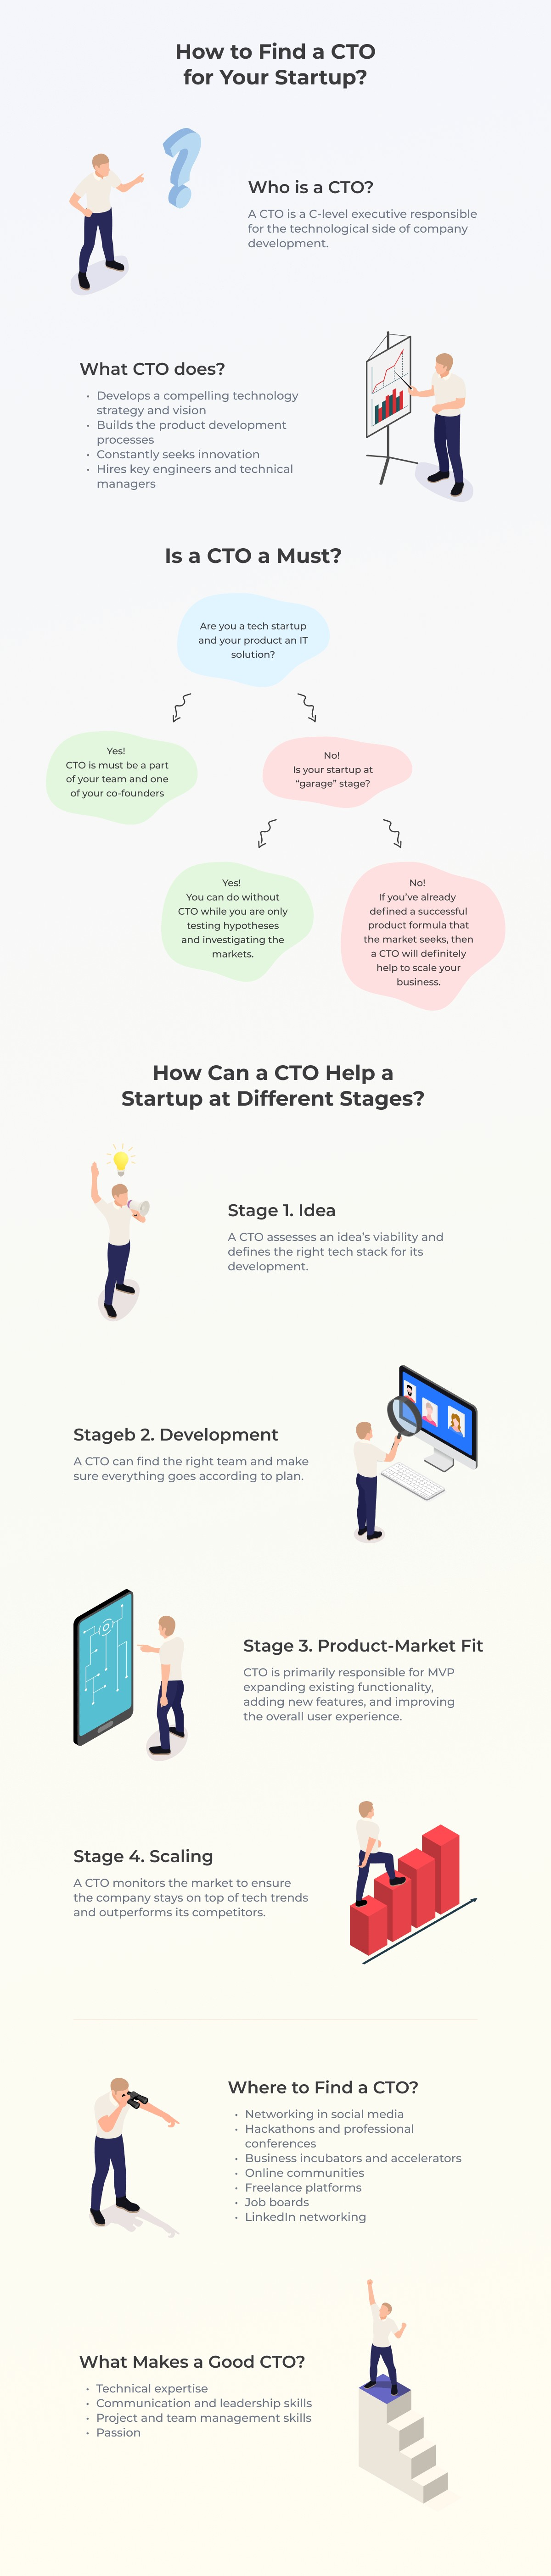 How to Find a CTO for Your Startup?